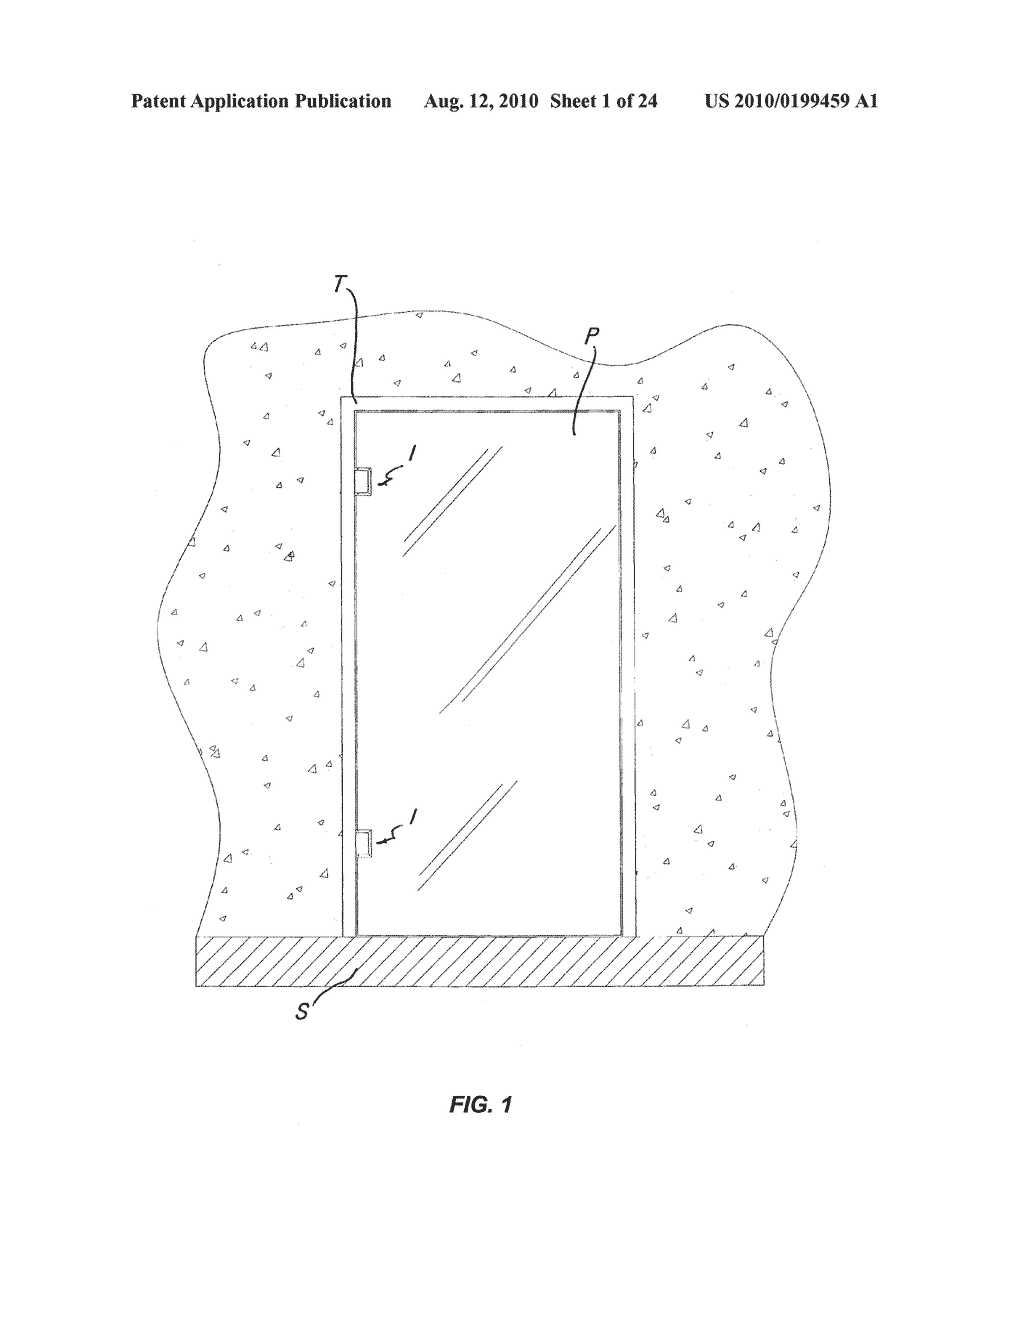 HINGE STRUCTURE FOR SELF-CLOSING DOORS OR THE LIKE, PARTICULARLY GLASS DOORS OR THE LIKE, AND ASSEMBLY INCORPORATING SUCH STRUCTURE - diagram, schematic, and image 02